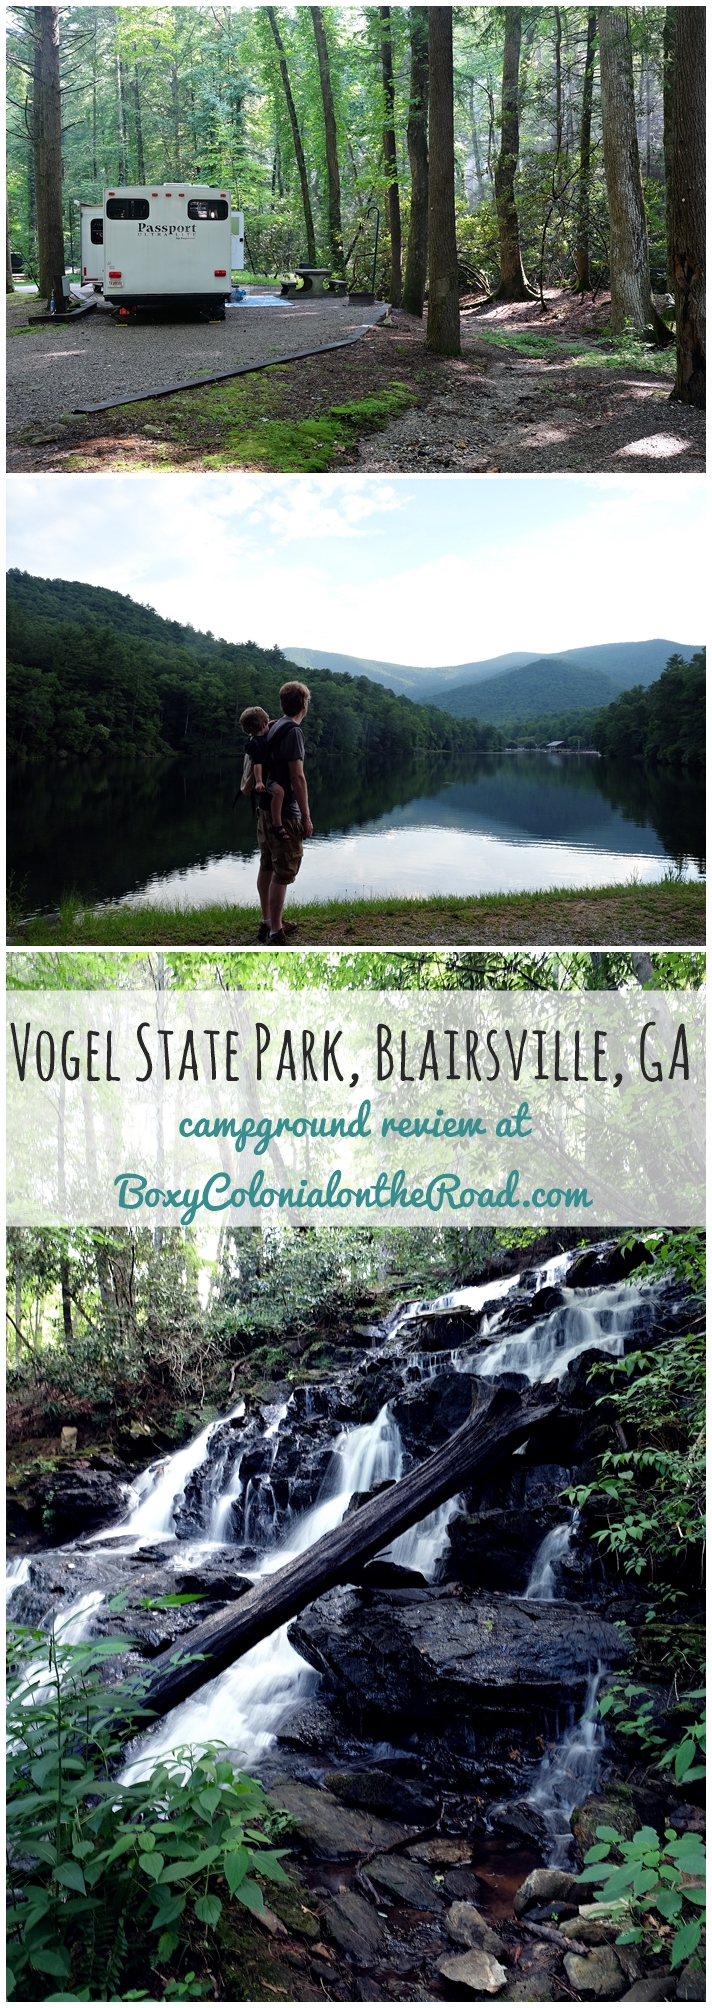 A few days at Vogel State Park in Blairsville, GA with kids: campground review and activities in the park